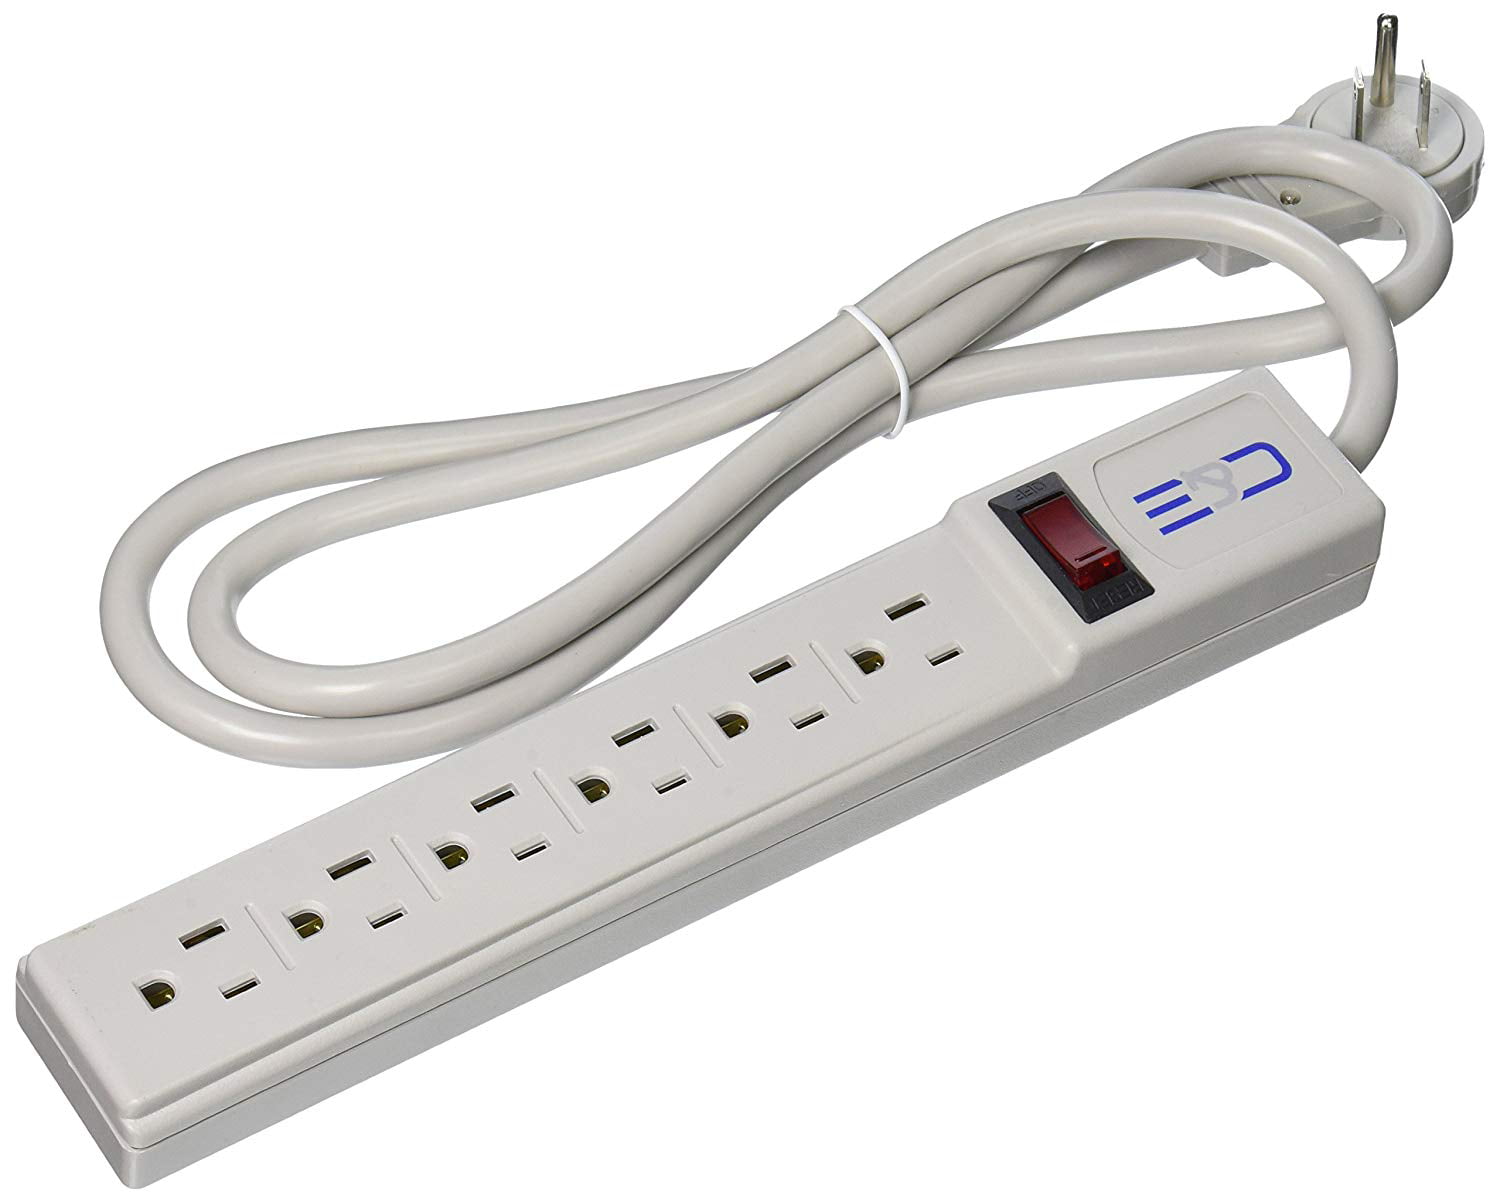 ✅ 8 Outlet Power Strip Surge Protector 15A 125V 90J FREE SHIPPING! UL Listed 